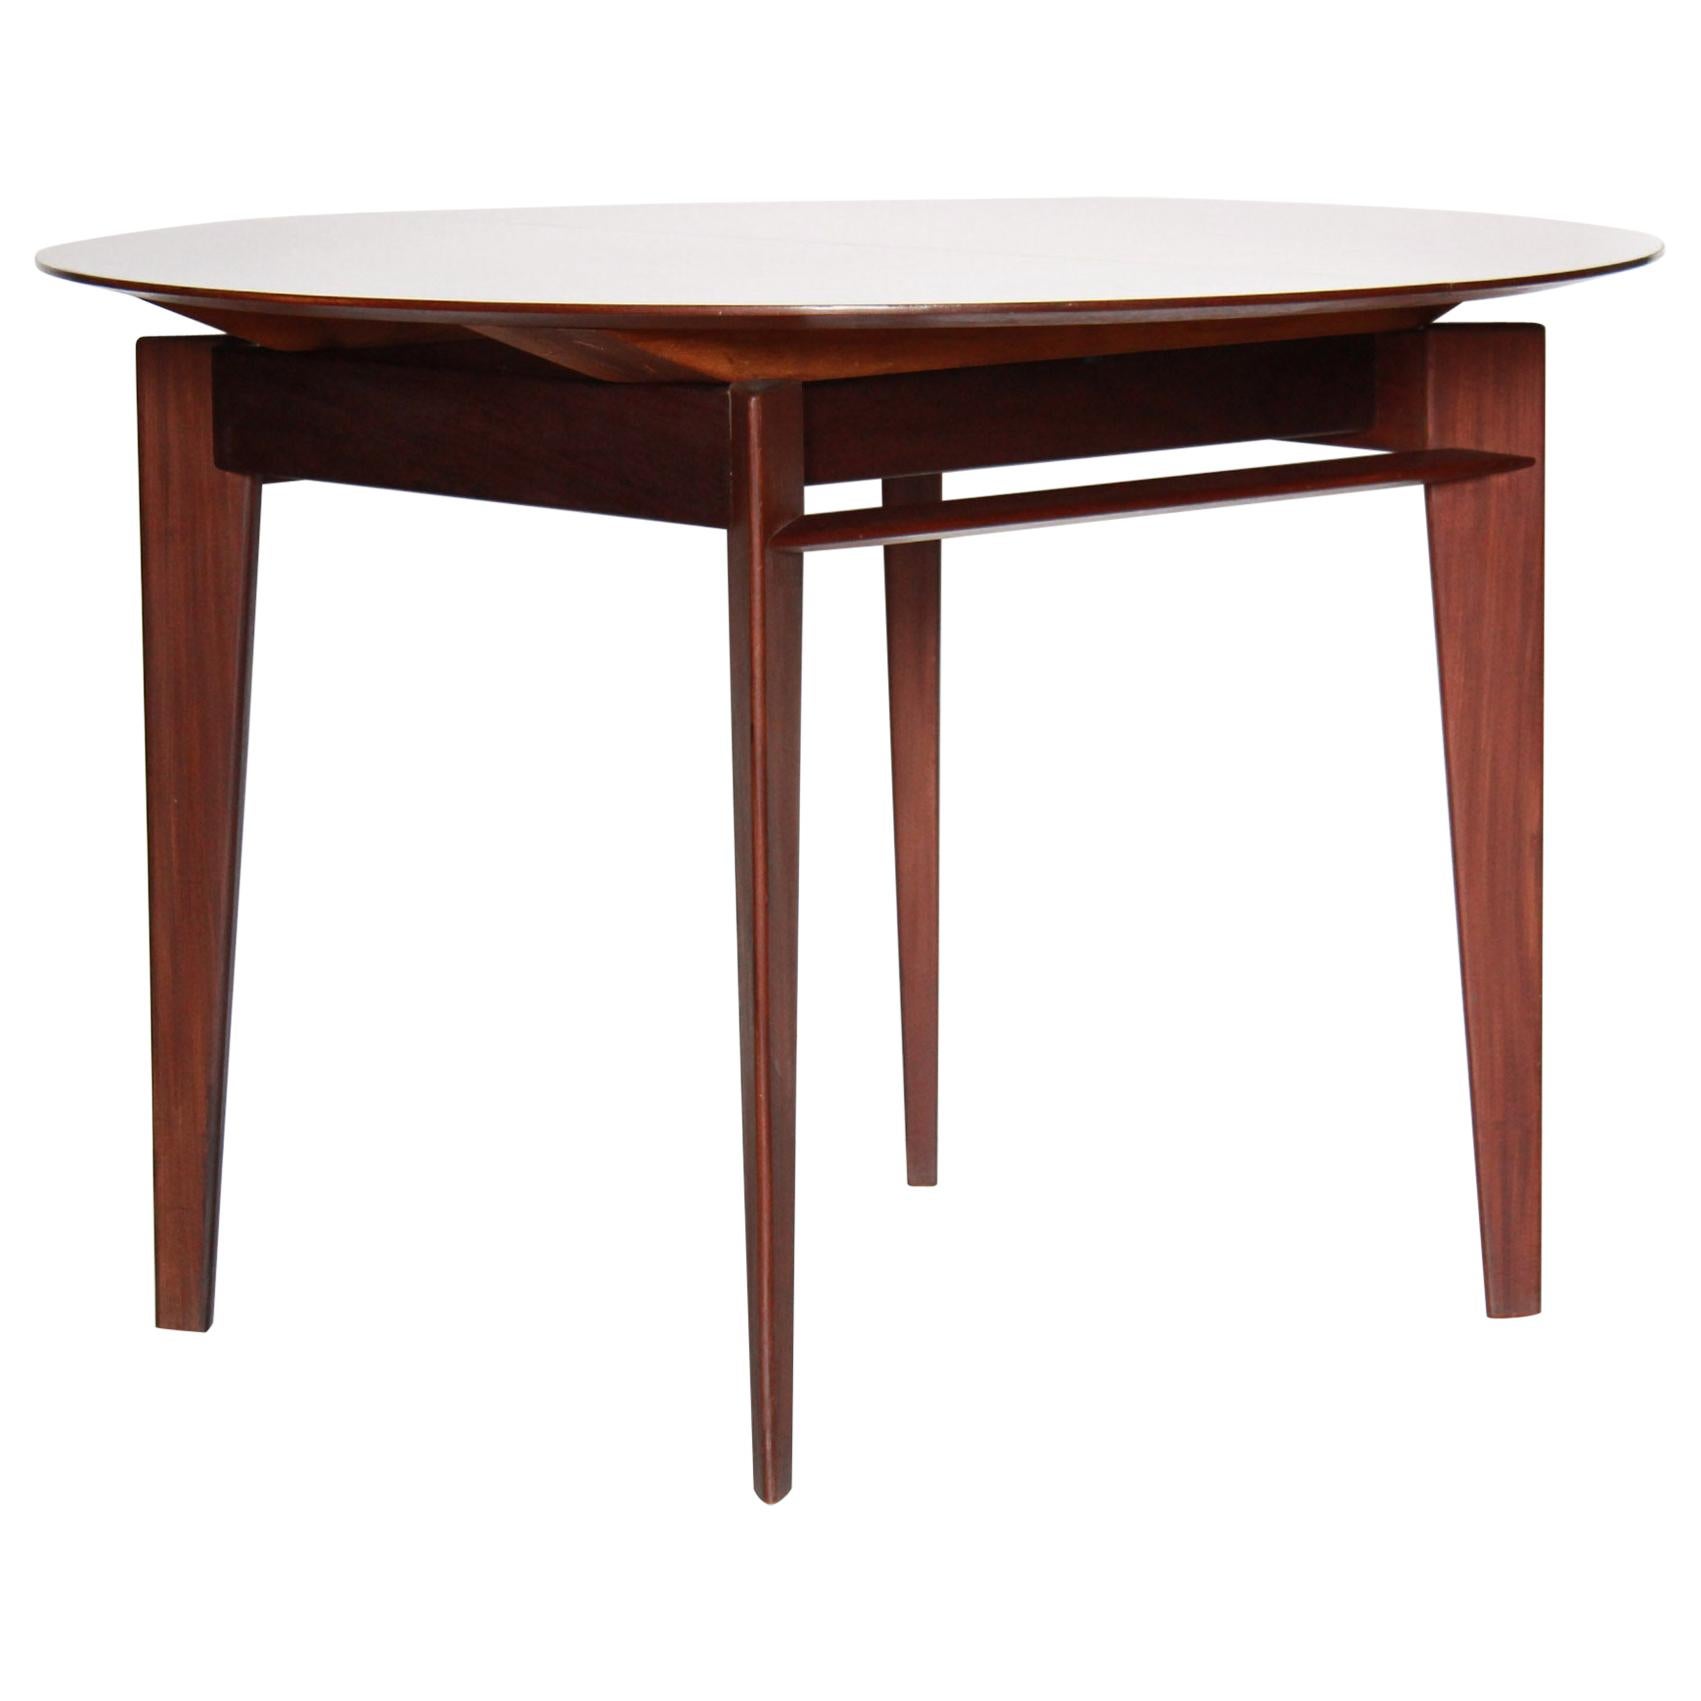 1950s Vintage extendible Dining Table in Solid Teak by Vittorio Dassi